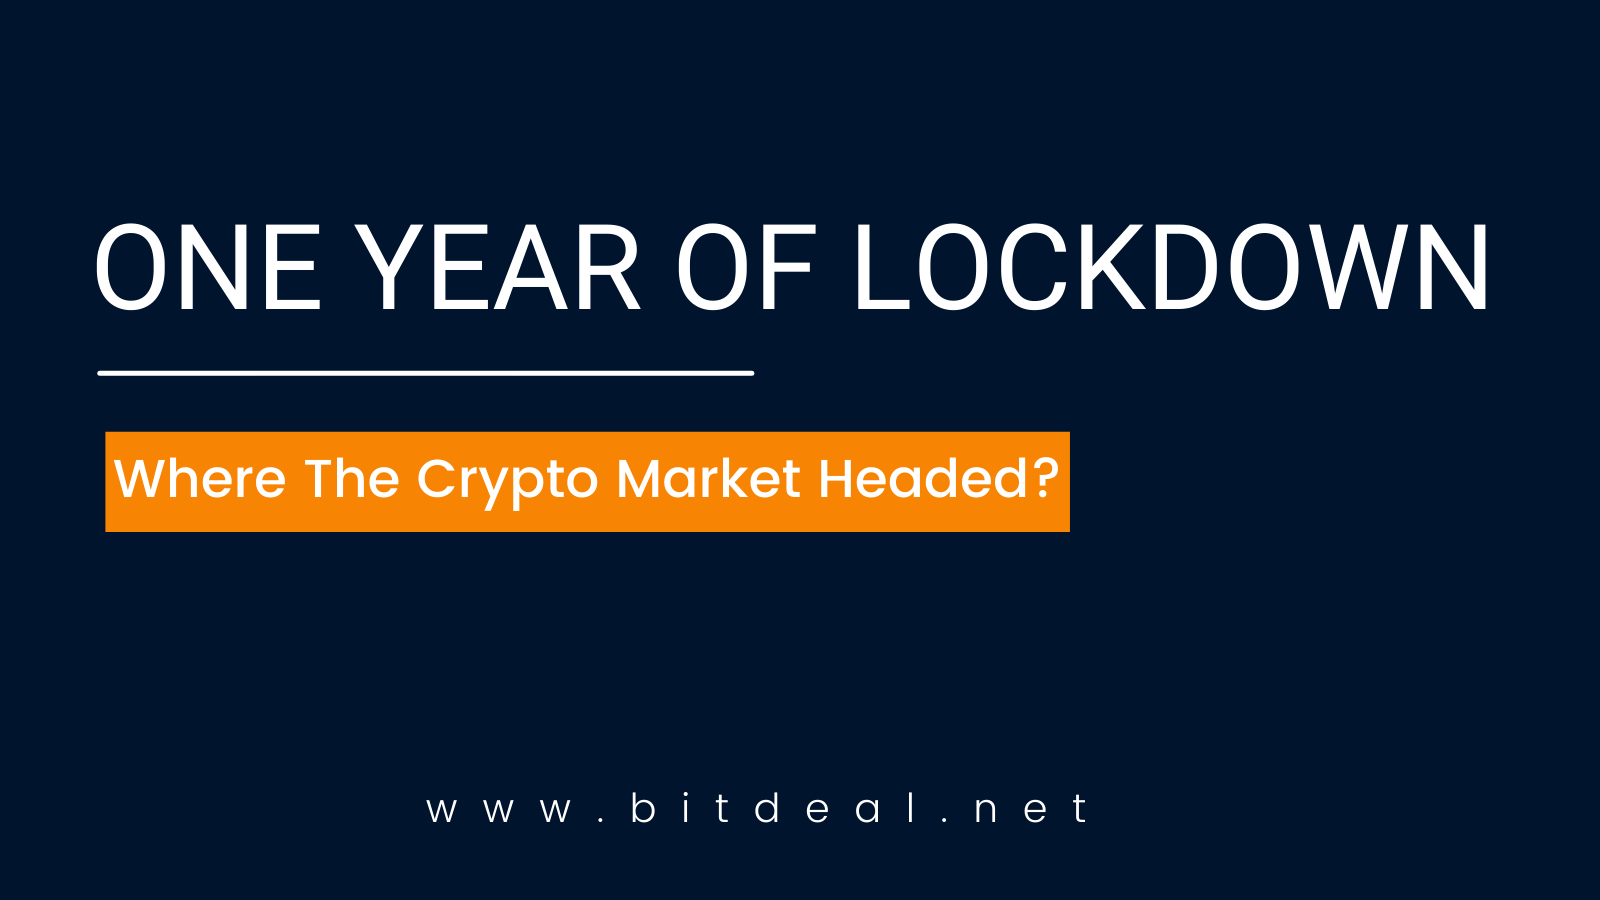 Article about One year of Lockdown - Where Does The Crypto Market stands Now